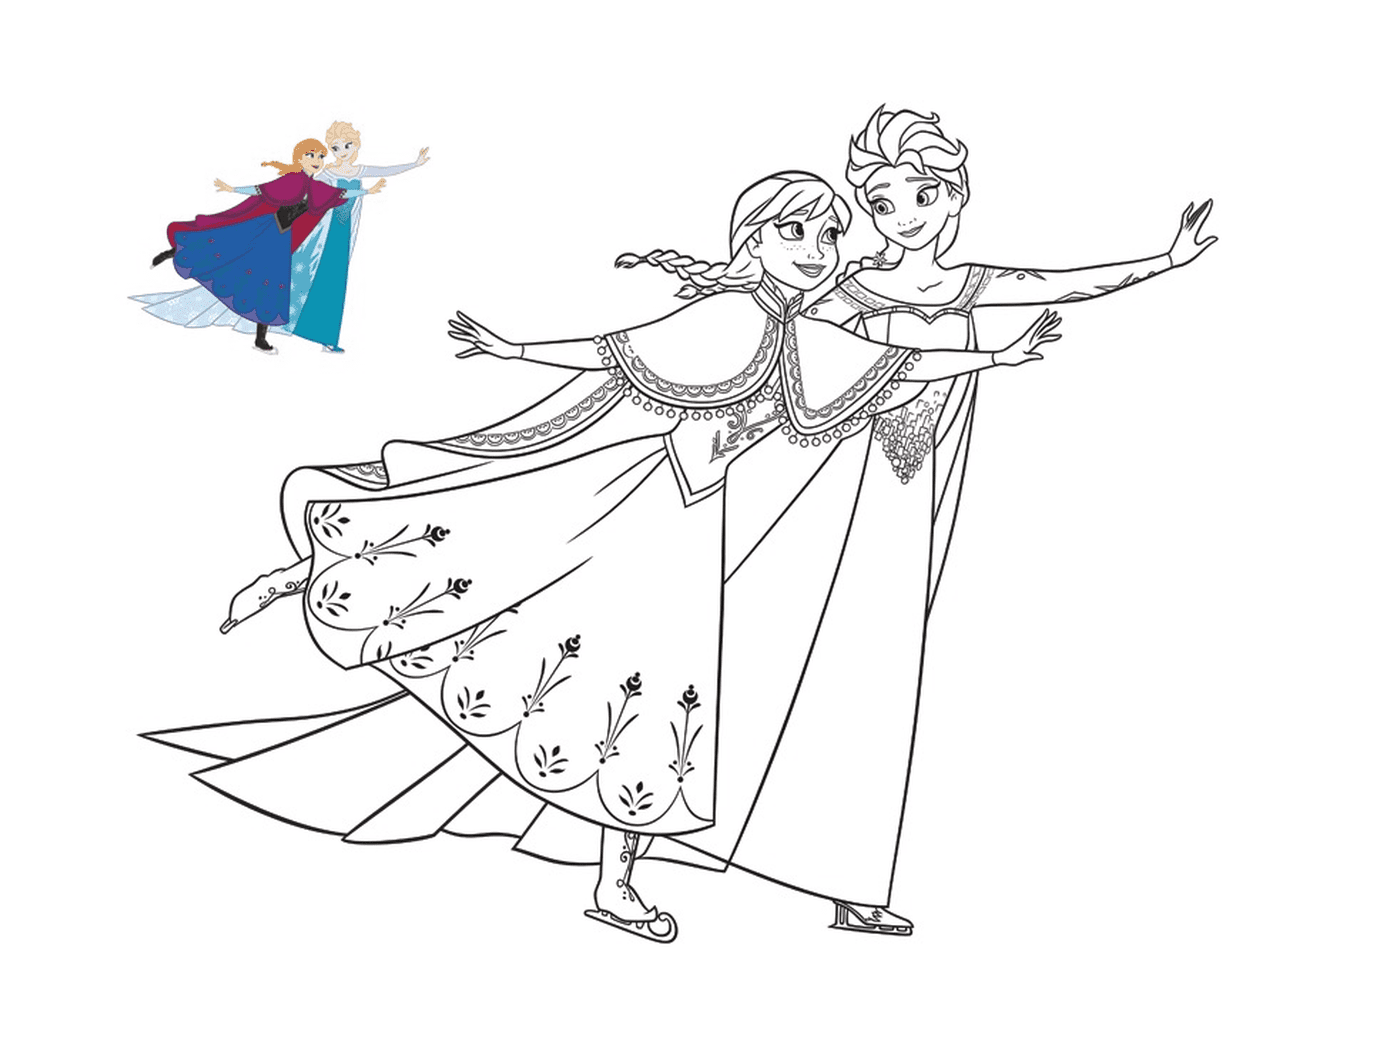  The sisters Elsa and Anna skate for Christmas 